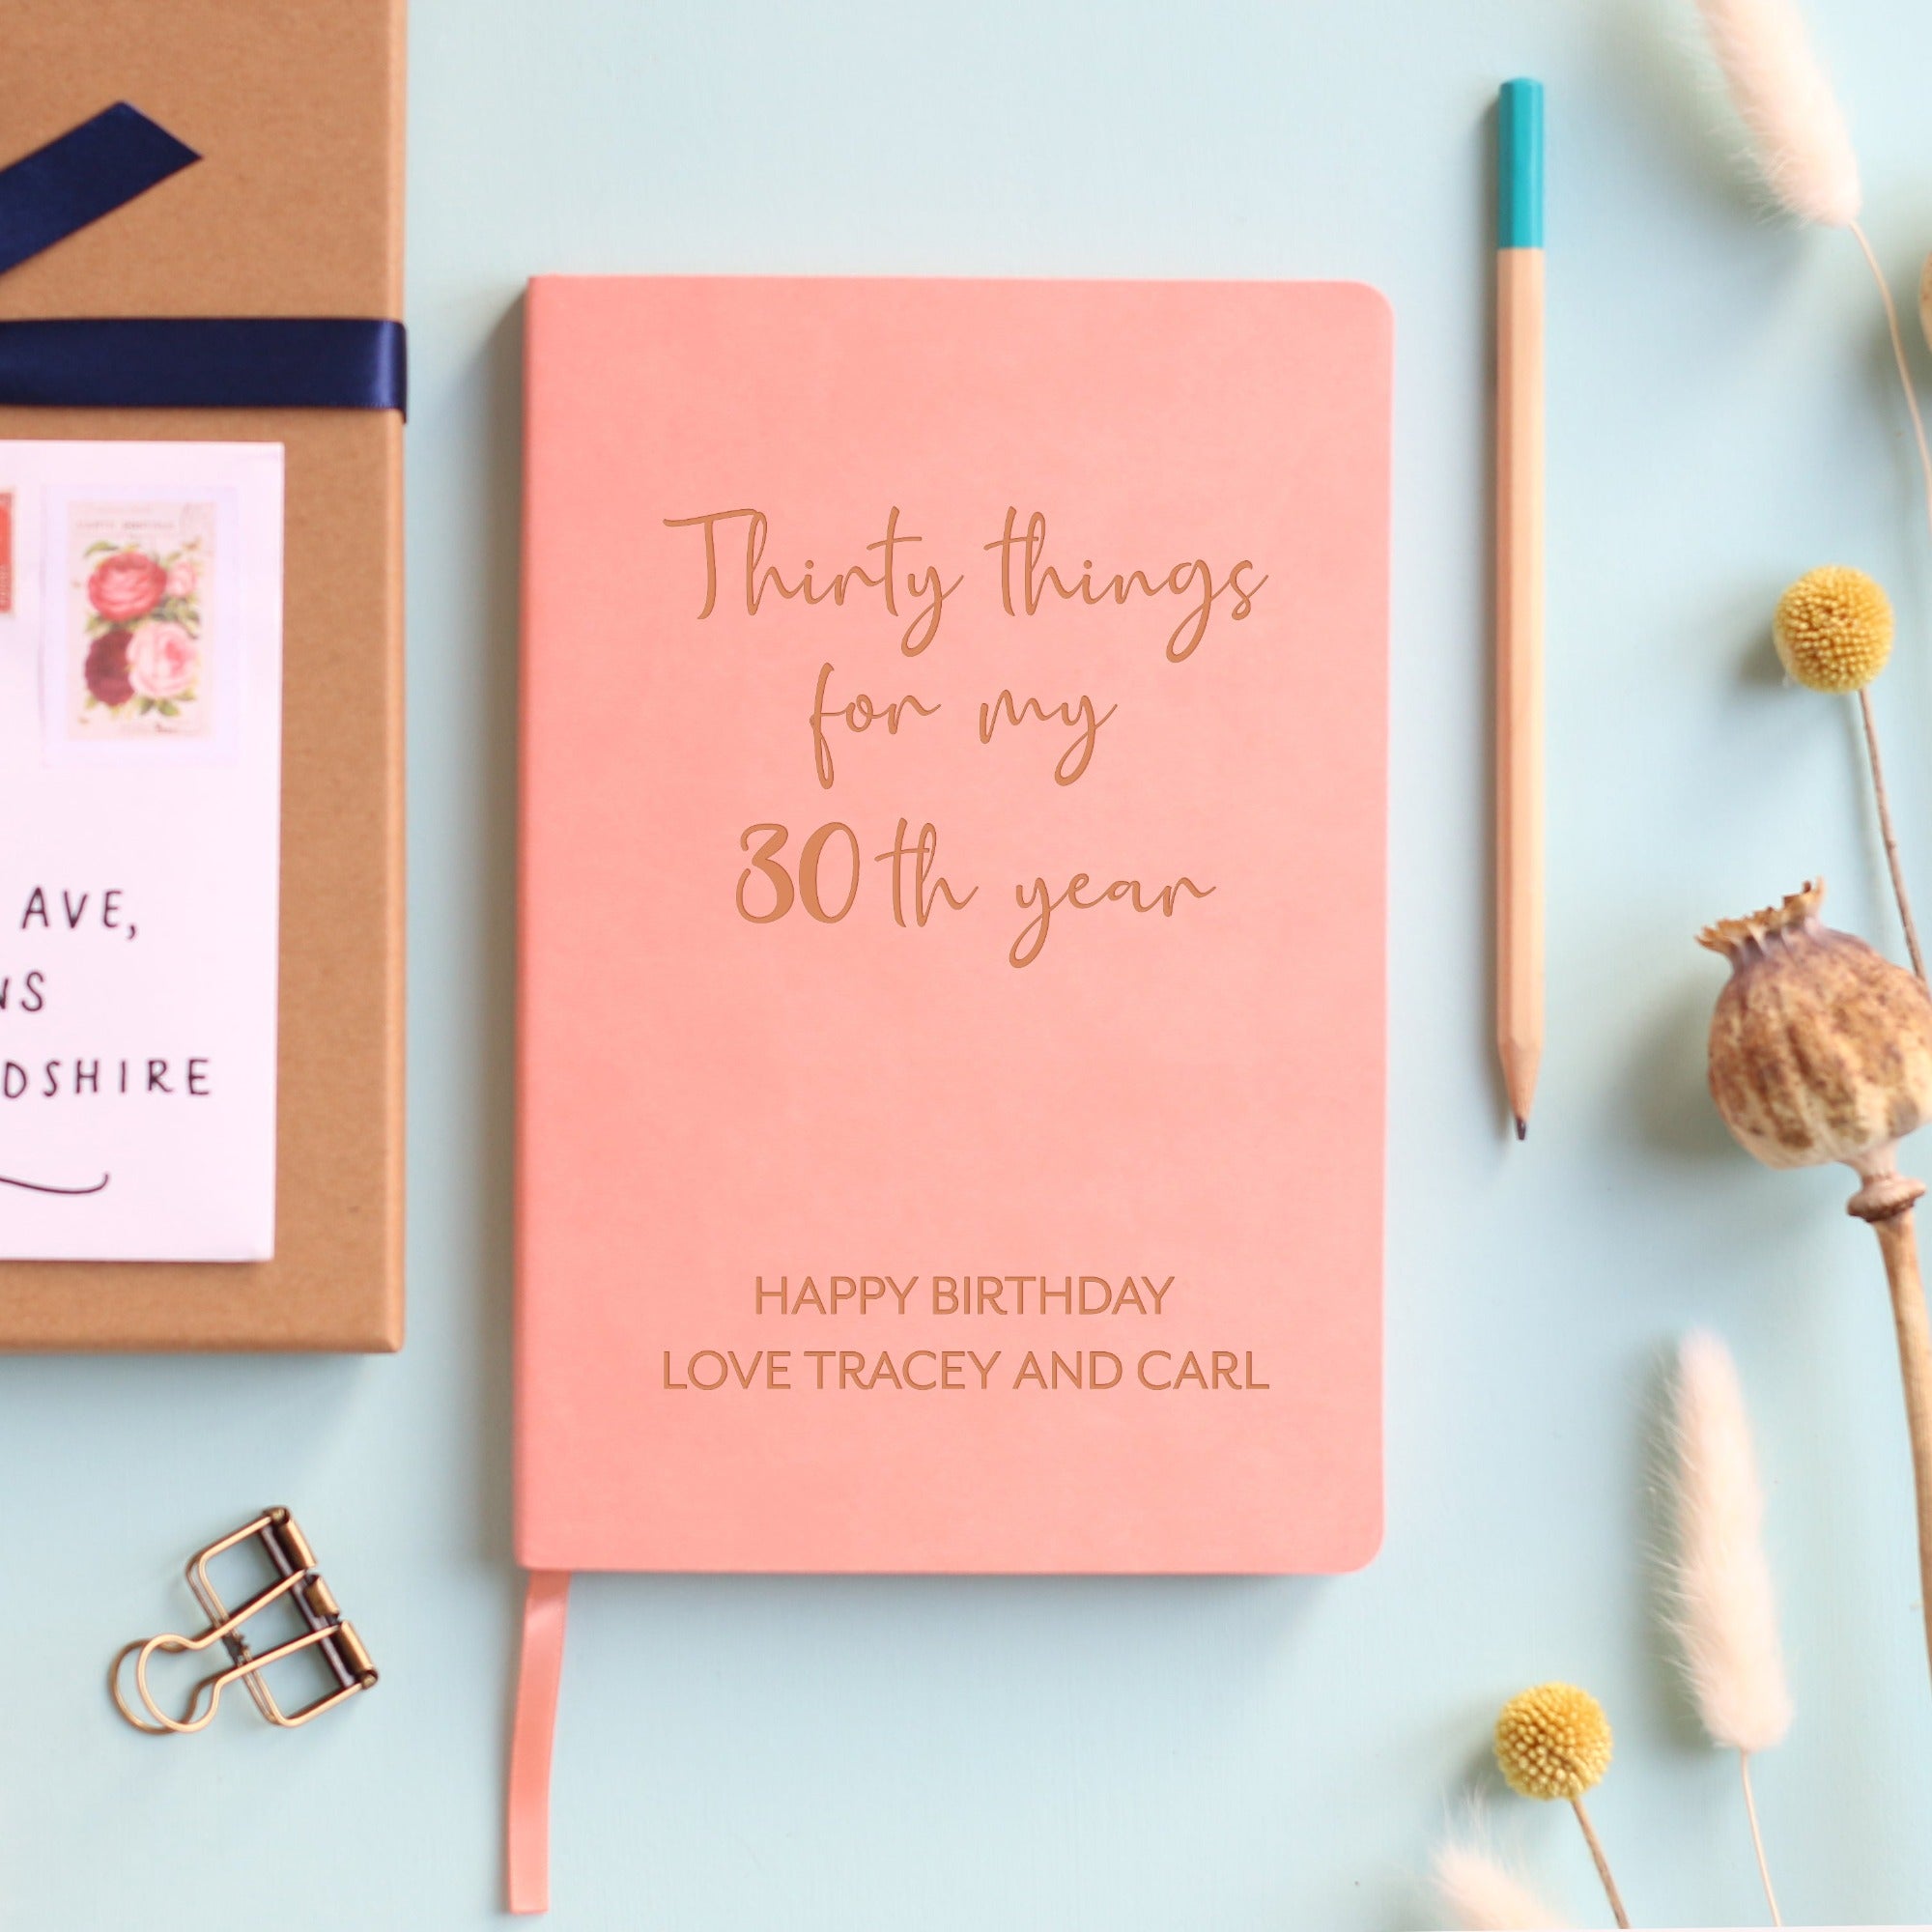 Blush pink vegan leather luxury hardback notebook laser engraved with Thirty things for my 30th year on the front plus 2 personalised lines of text